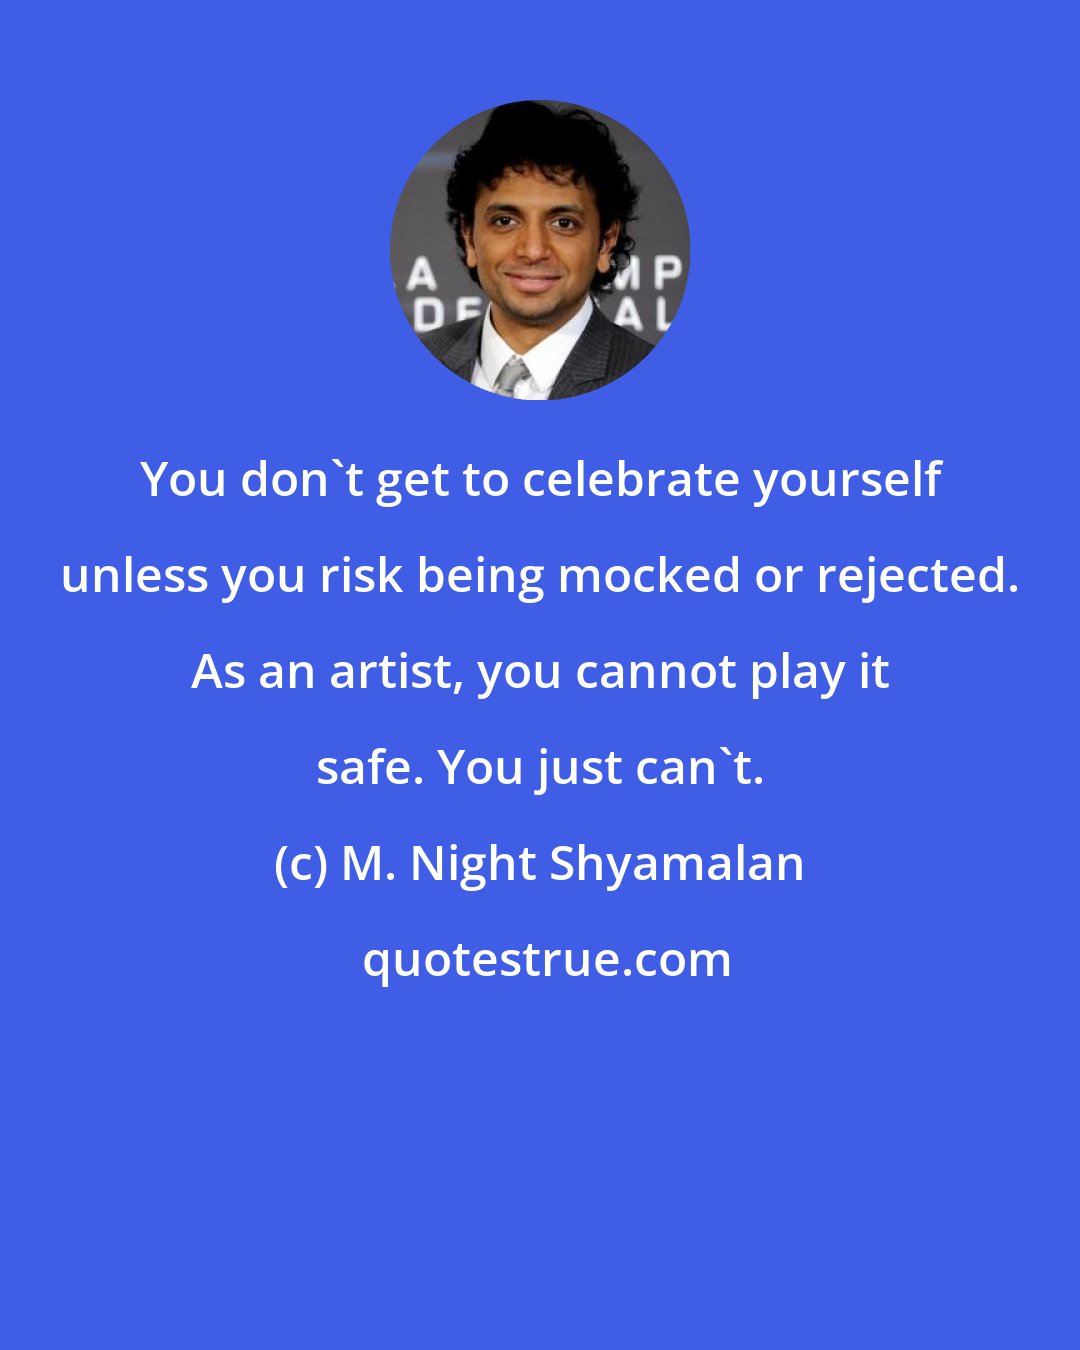 M. Night Shyamalan: You don't get to celebrate yourself unless you risk being mocked or rejected. As an artist, you cannot play it safe. You just can't.